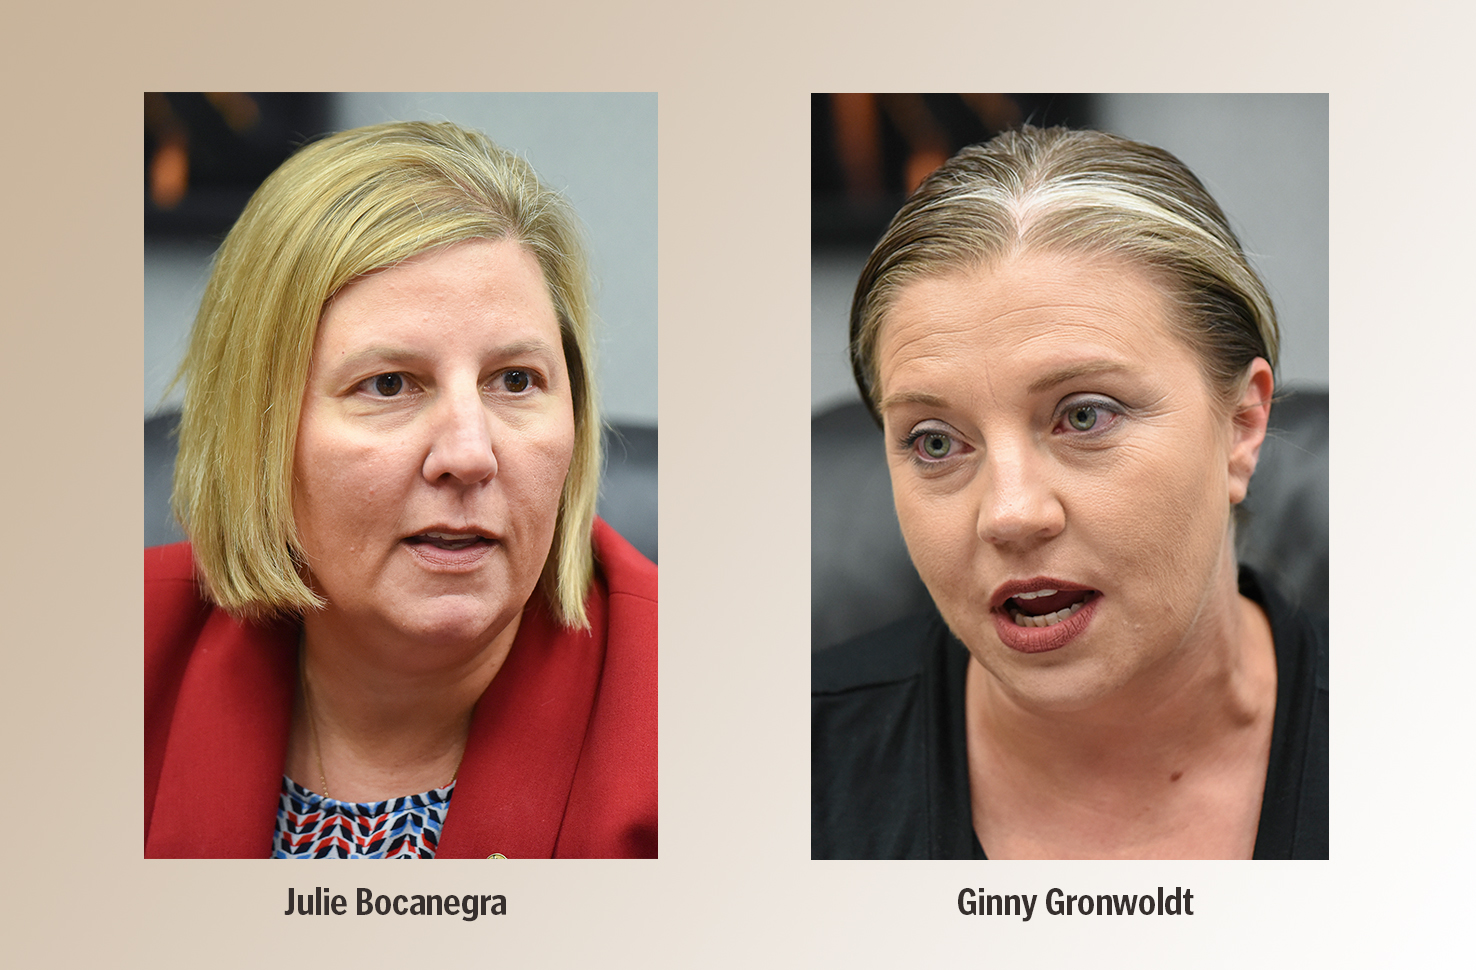 Incumbent Julie Bocanegra and political newcomer Ginny Gronwoldt had big leads Tuesday night in their races for seats on the Evergreen Public Schools board.